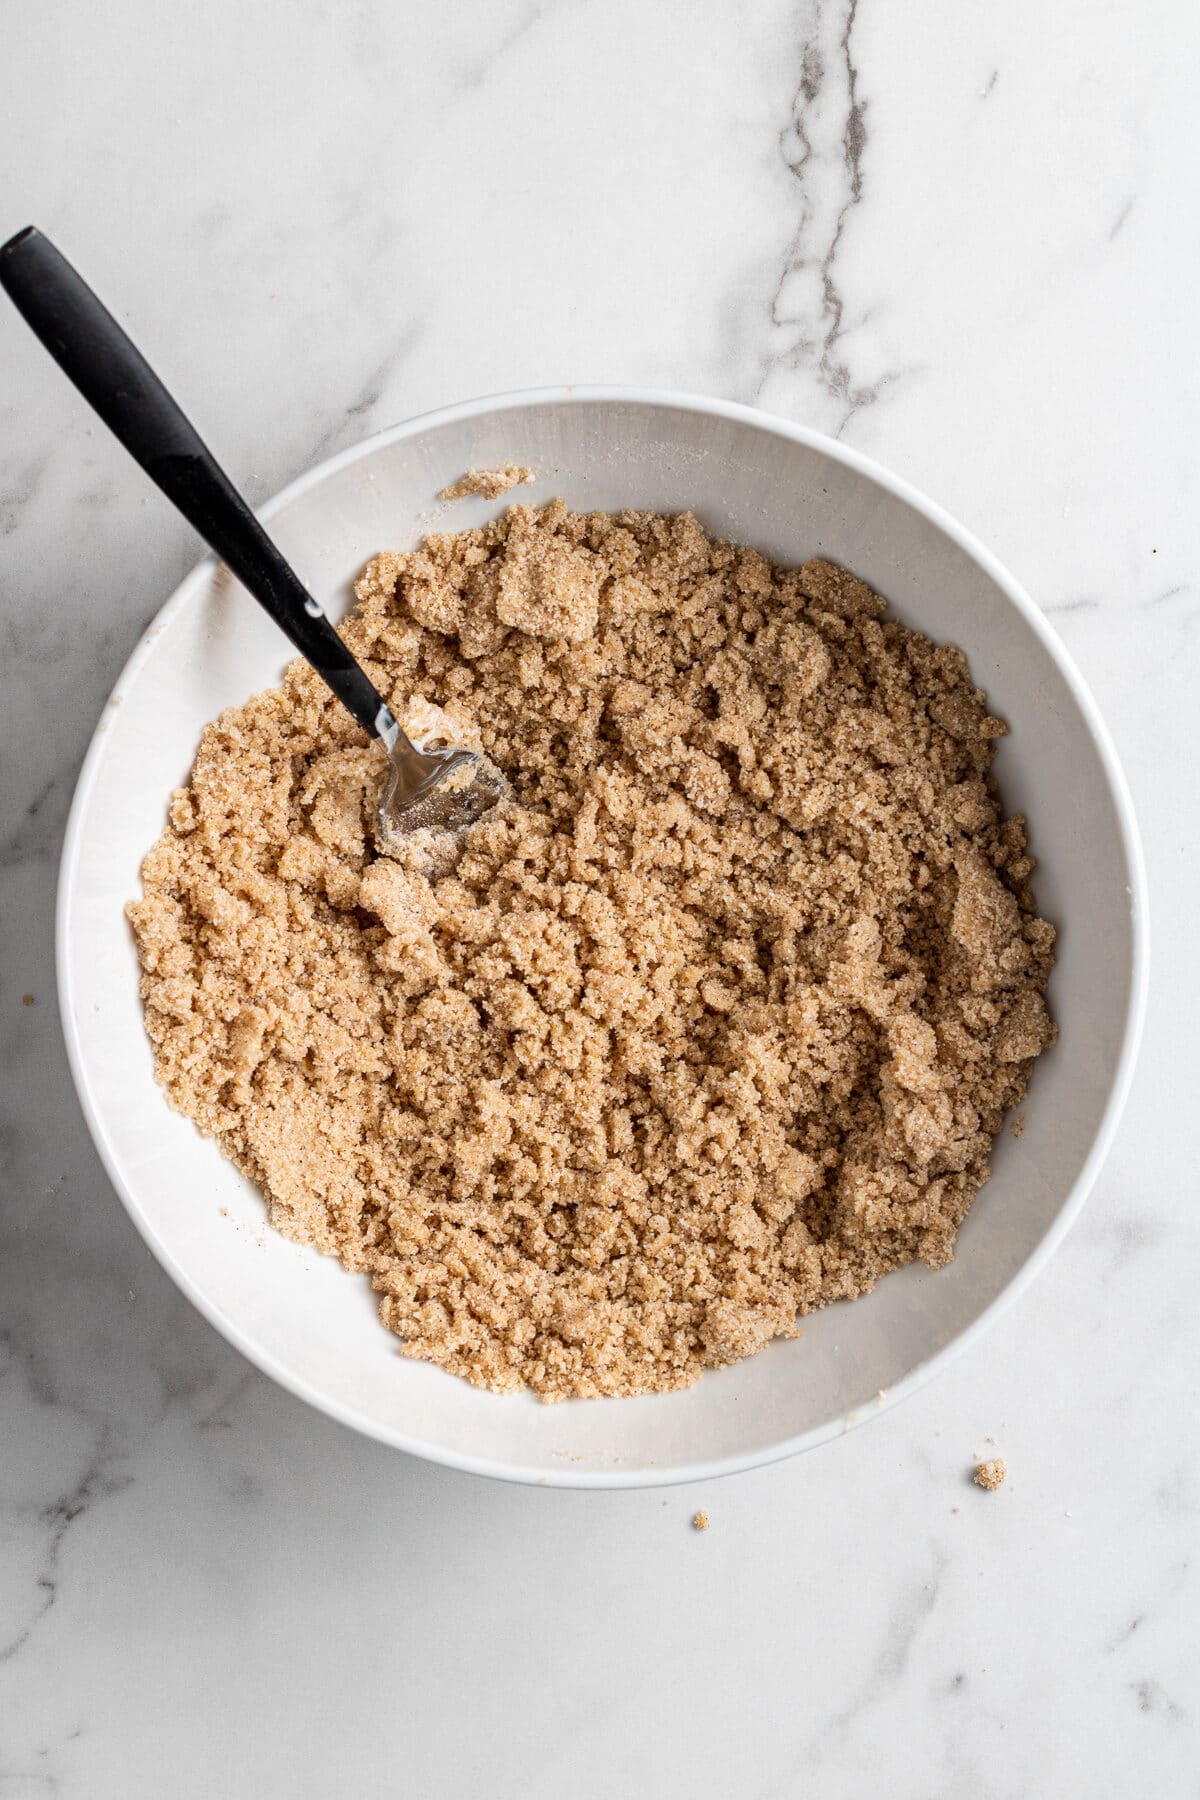 sugar and cinnamon and butter in a bowl to make cinnamon streusel